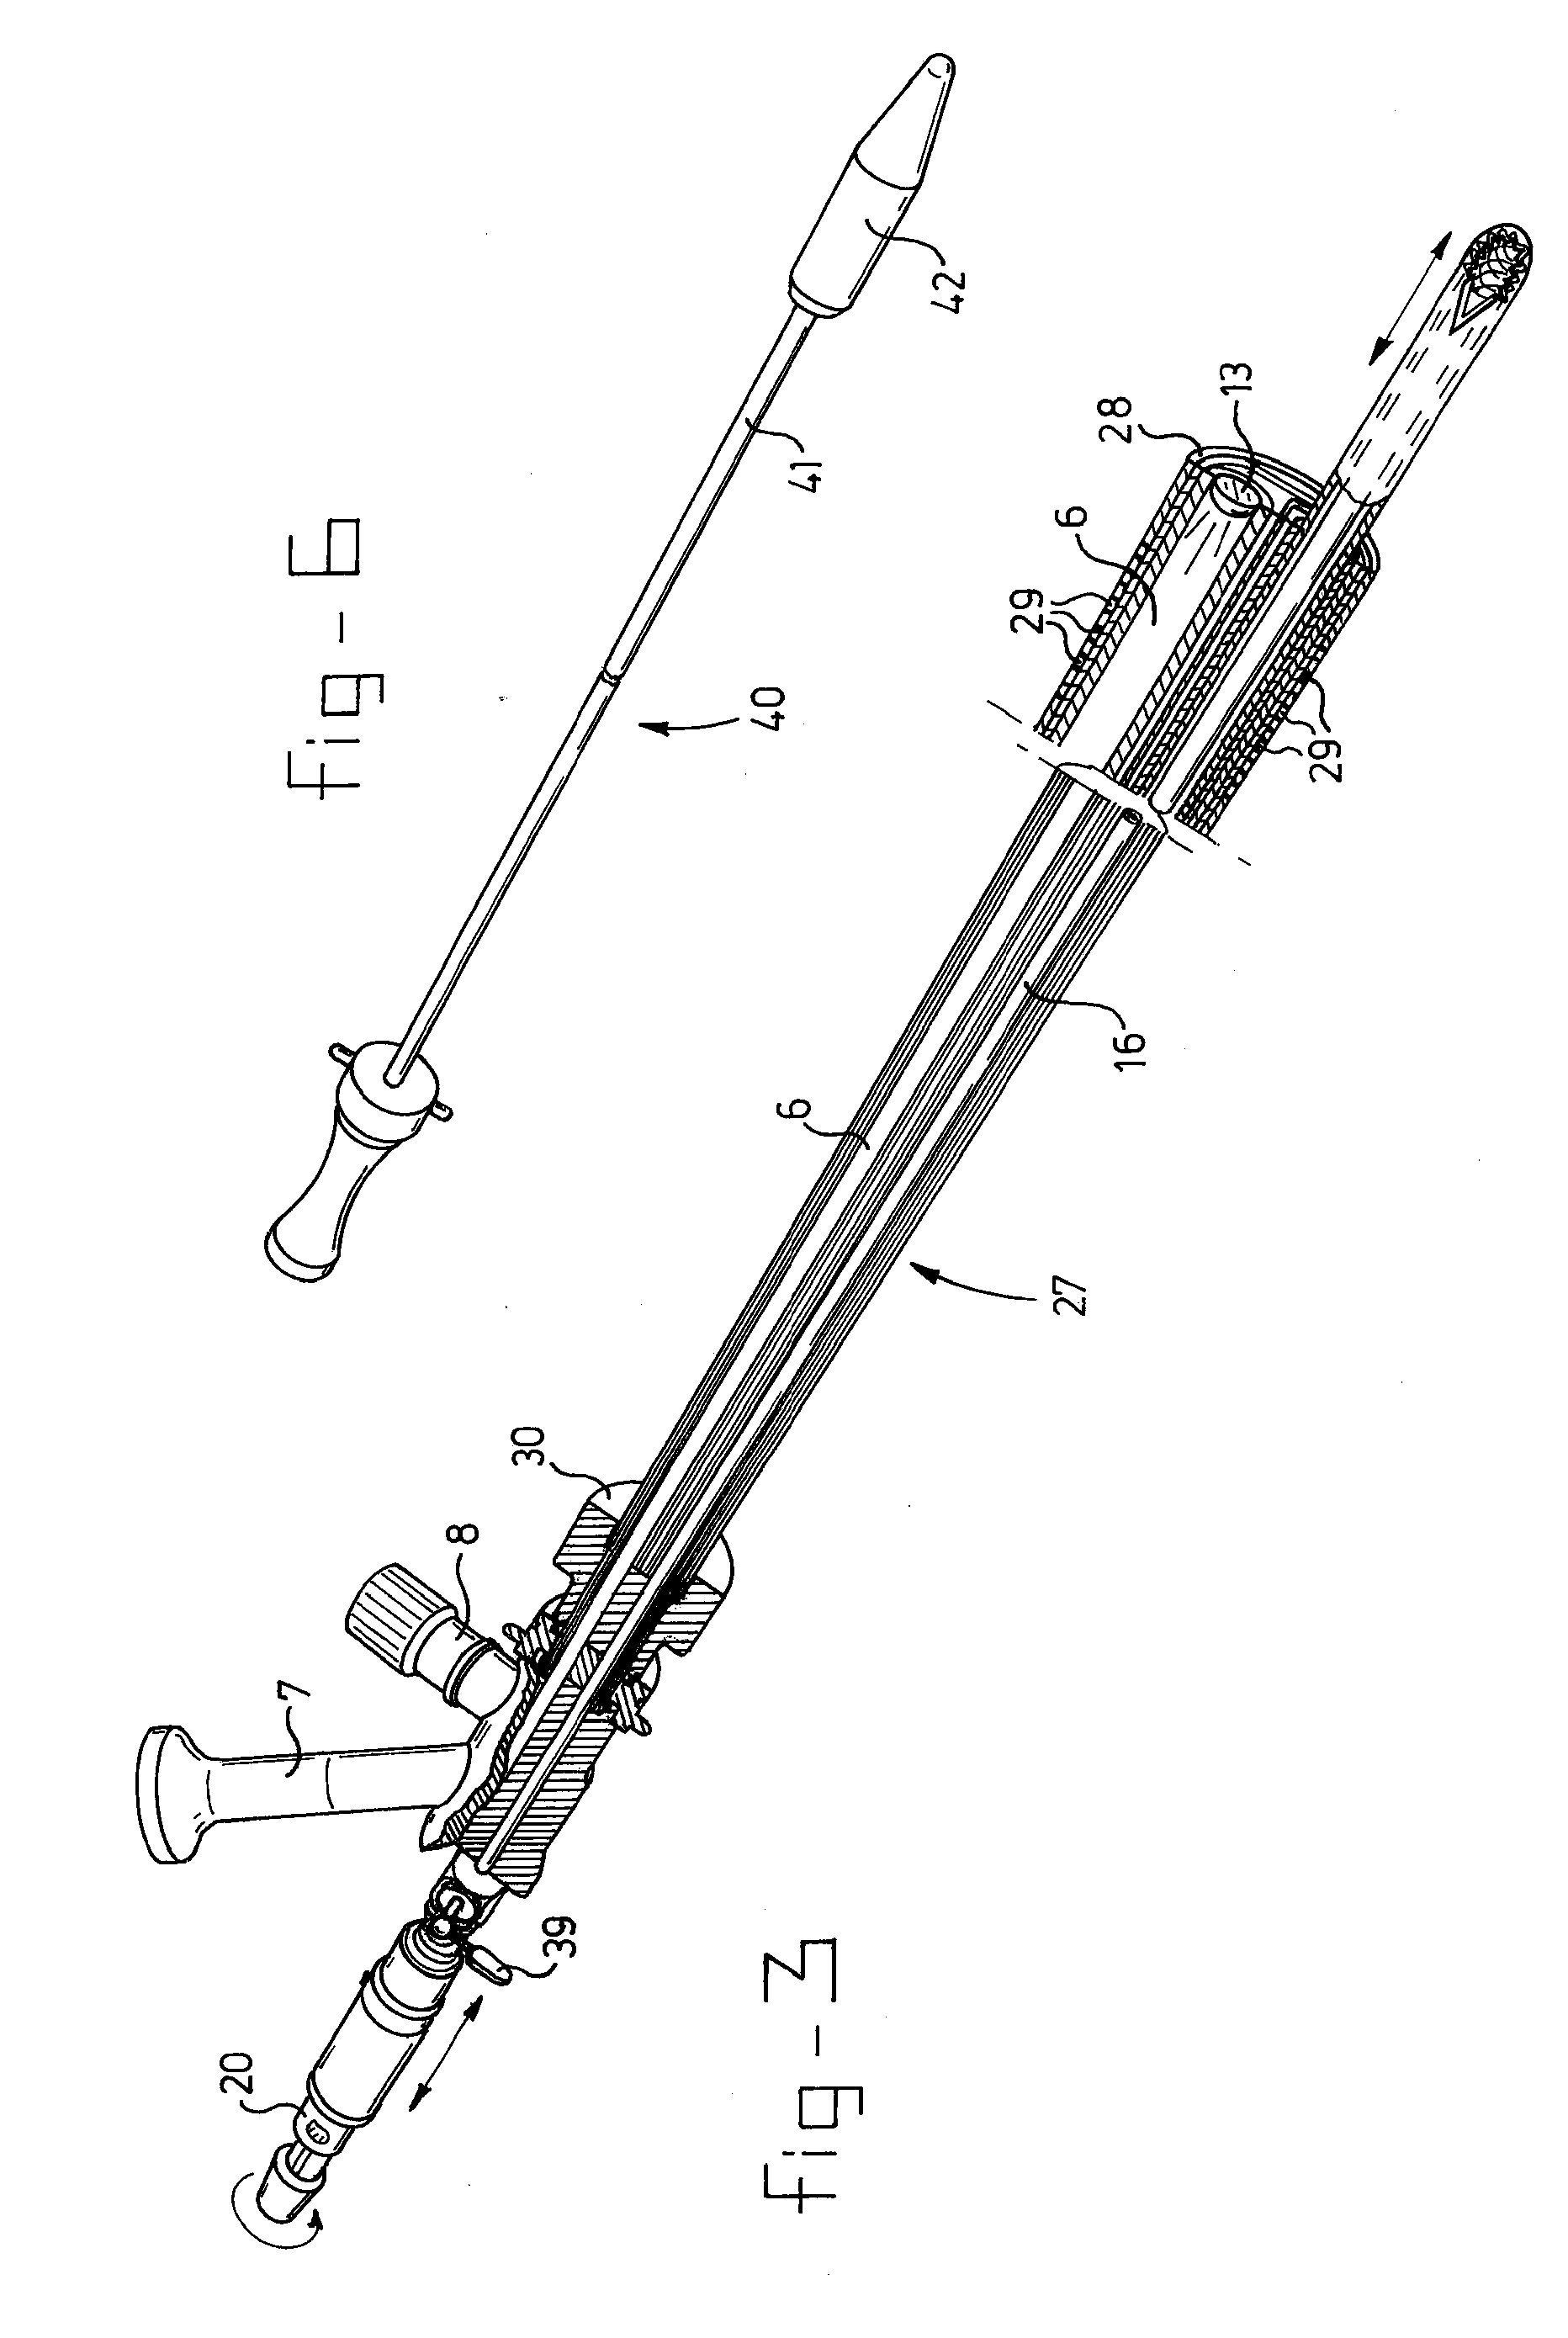 Surgical endoscopic cutting device and method for its use